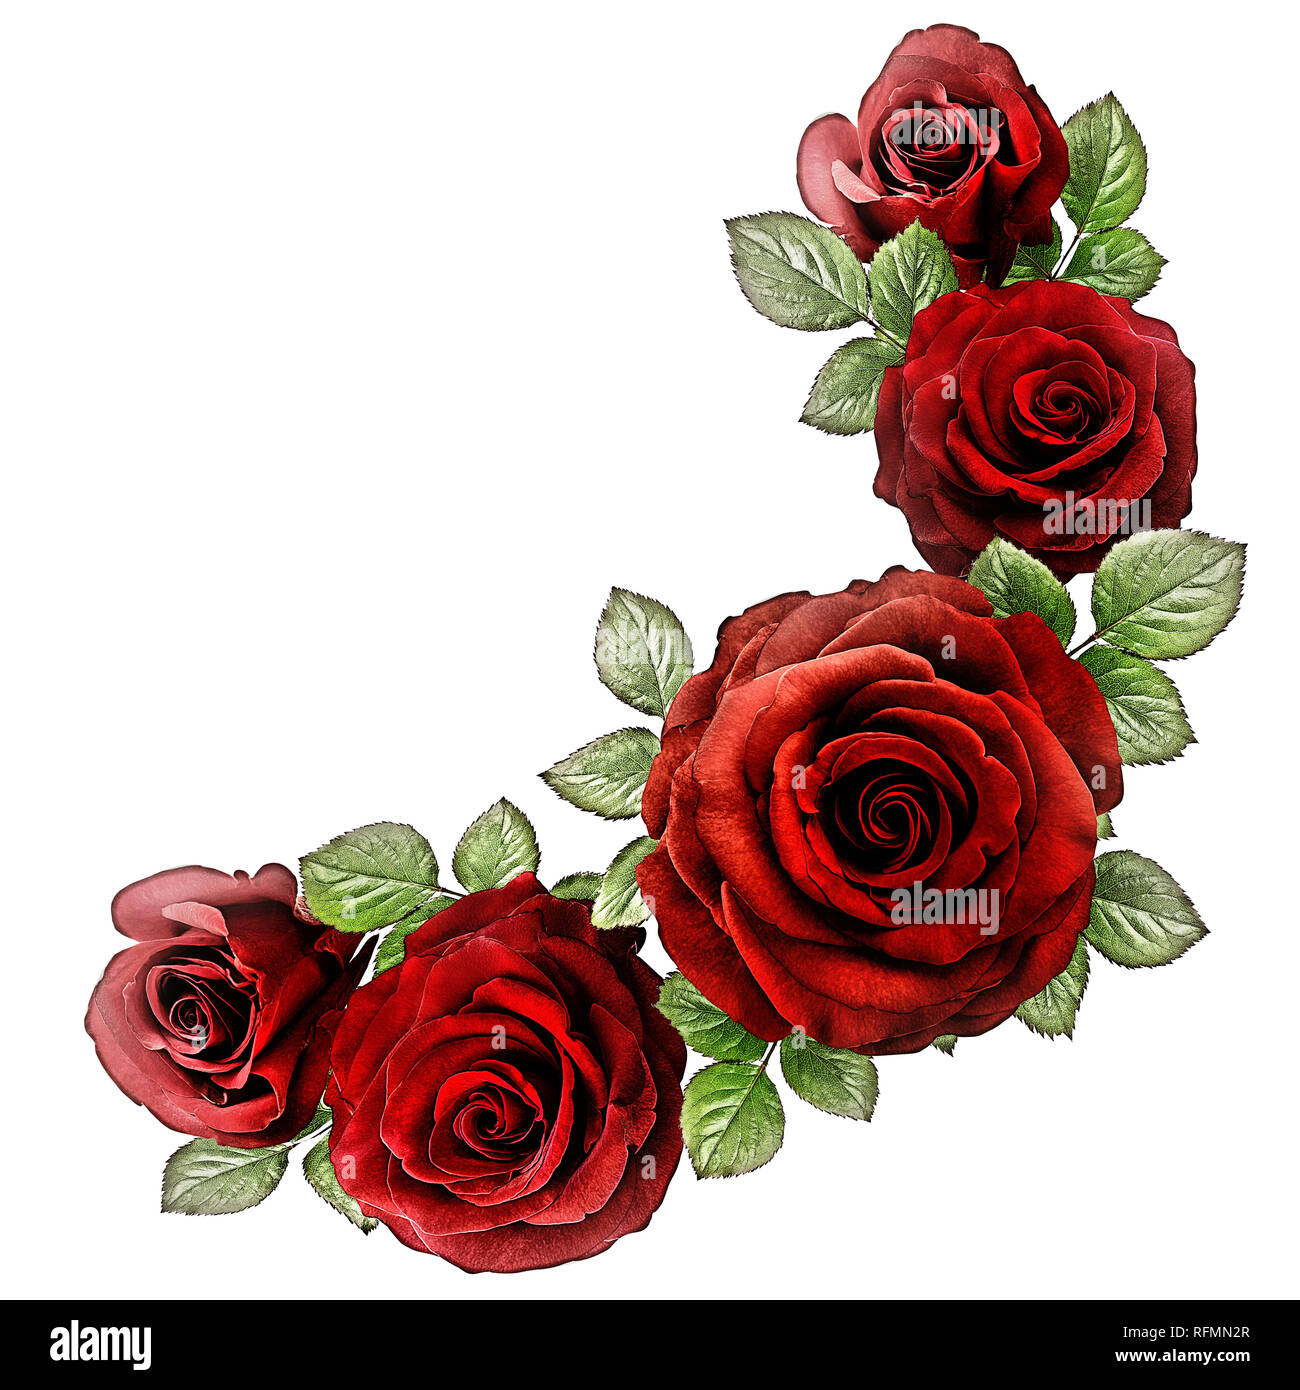 Roses Art Design . Frame made roses, green leaves Valentine's background with roses. Valentines day card concept. Stock Photo